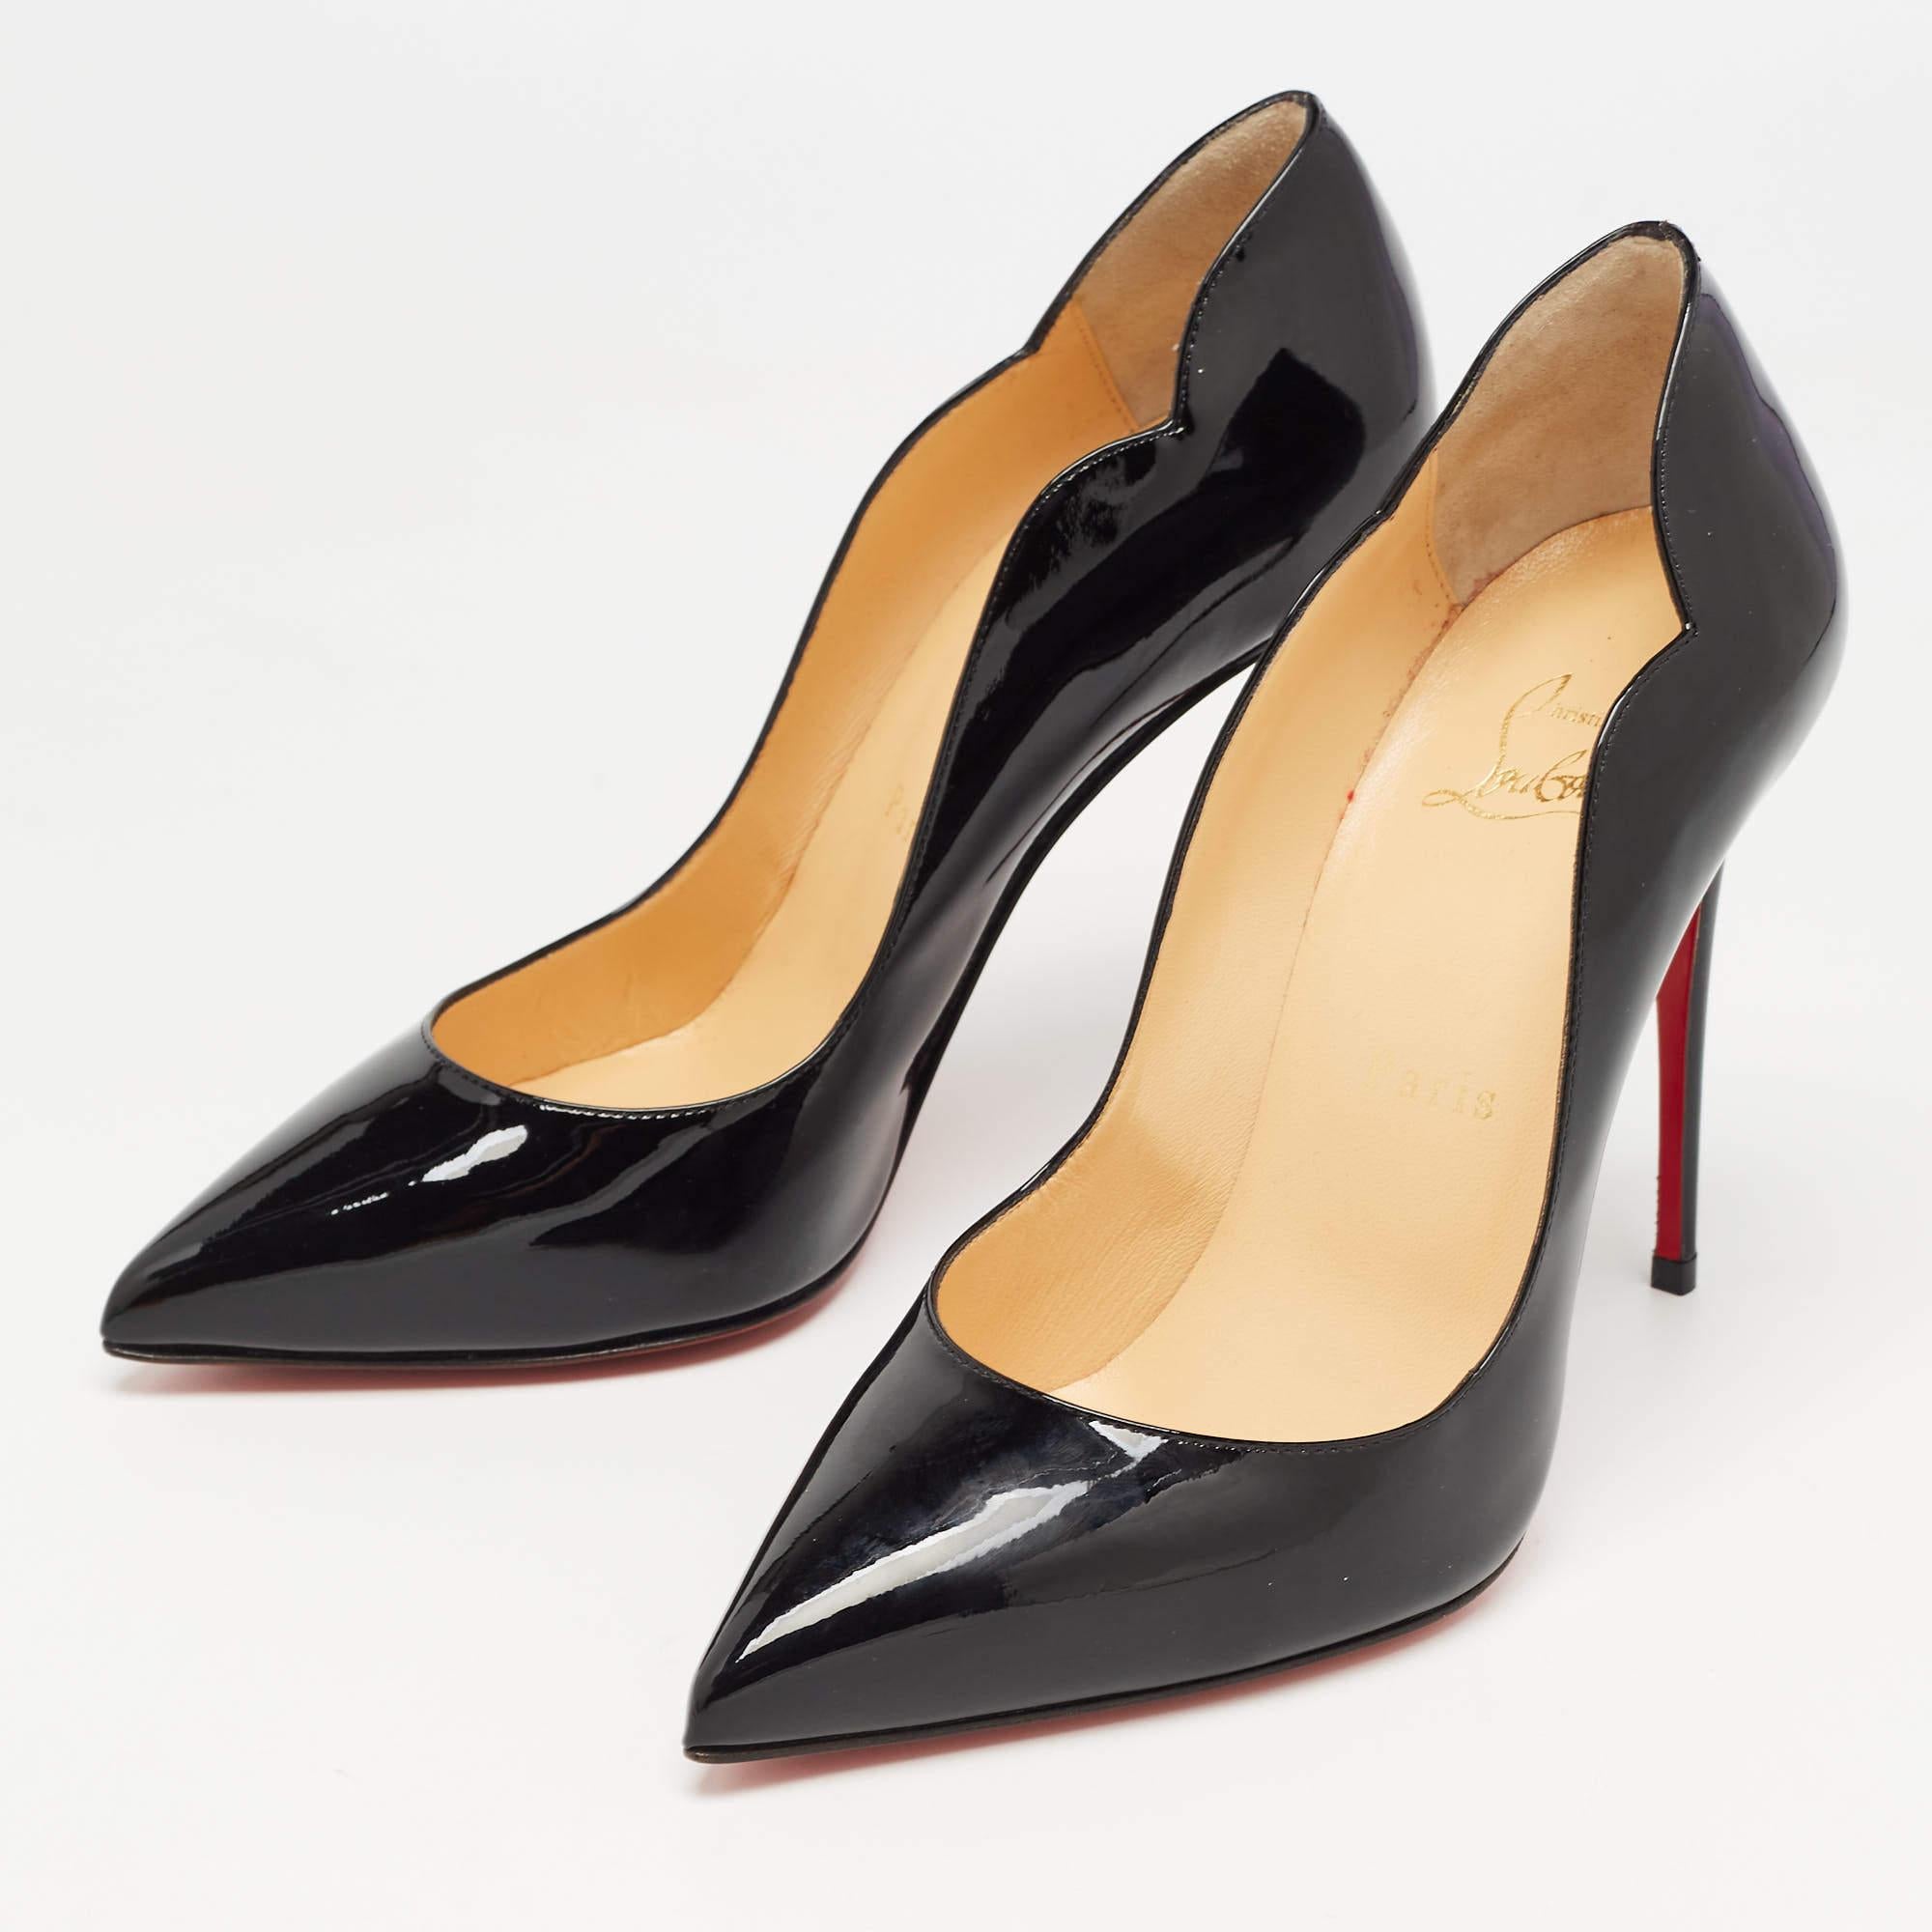 These Hot Chick pumps from Christian Louboutin are meant to be a loved choice. Wonderfully crafted and balanced on sleek heels, the pumps will lift your feet in a stunning silhouette.

